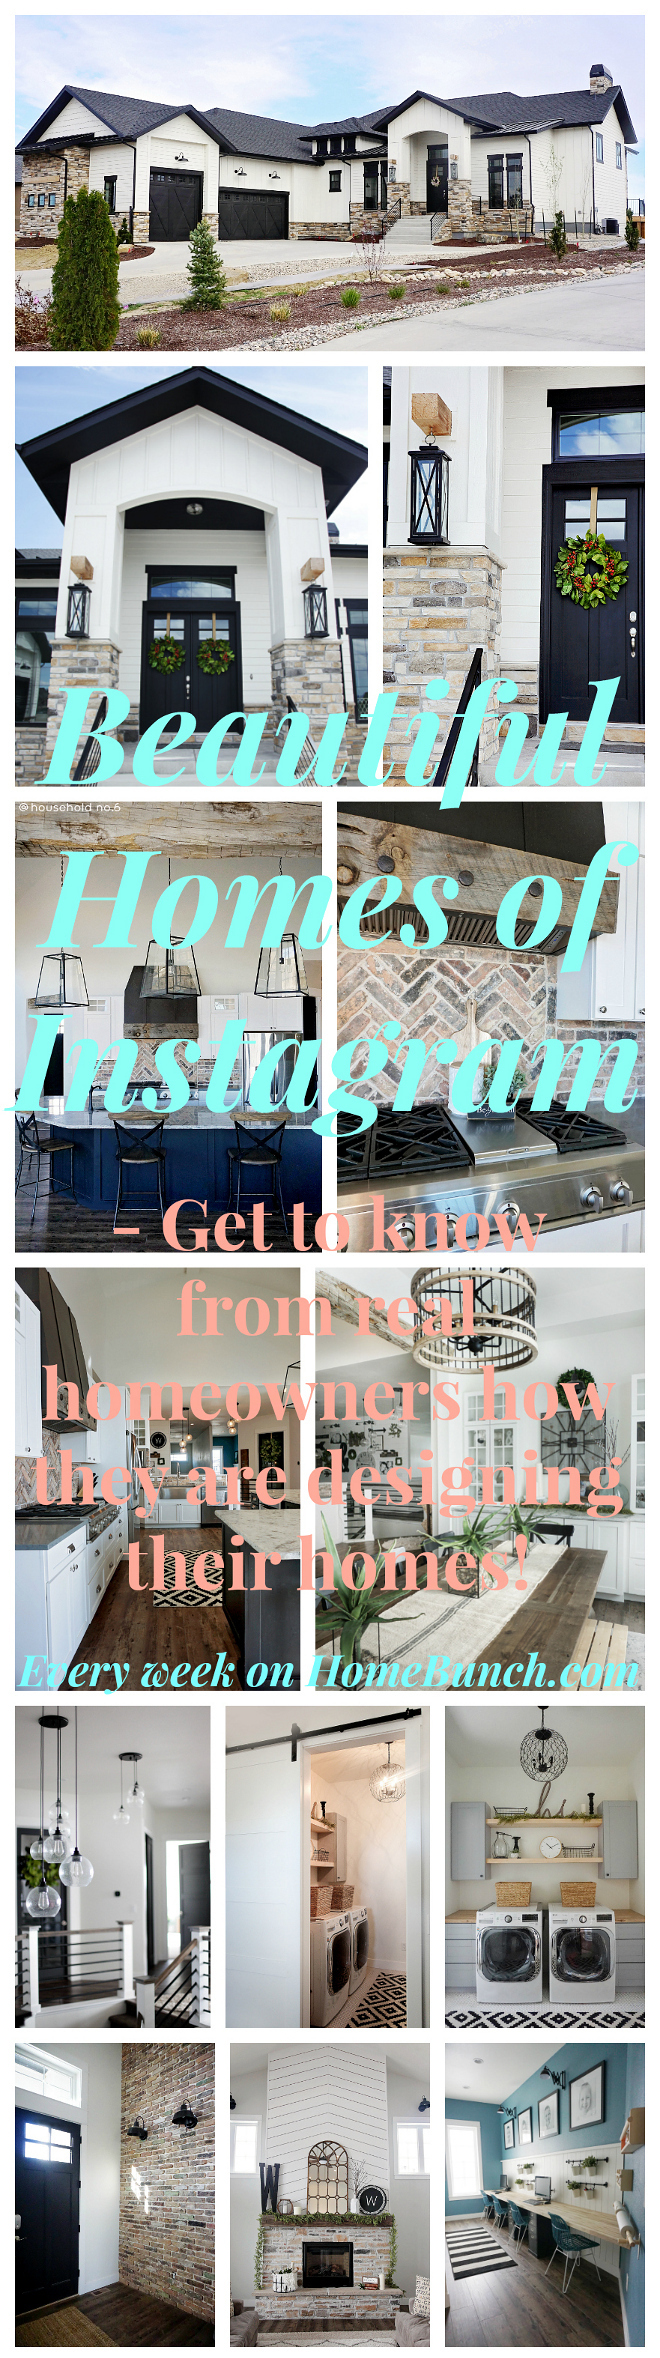 Beautiful Homes of Instagram Get to know from real homeowners how they are designing their homes #BeautifulHomes #Instagram 